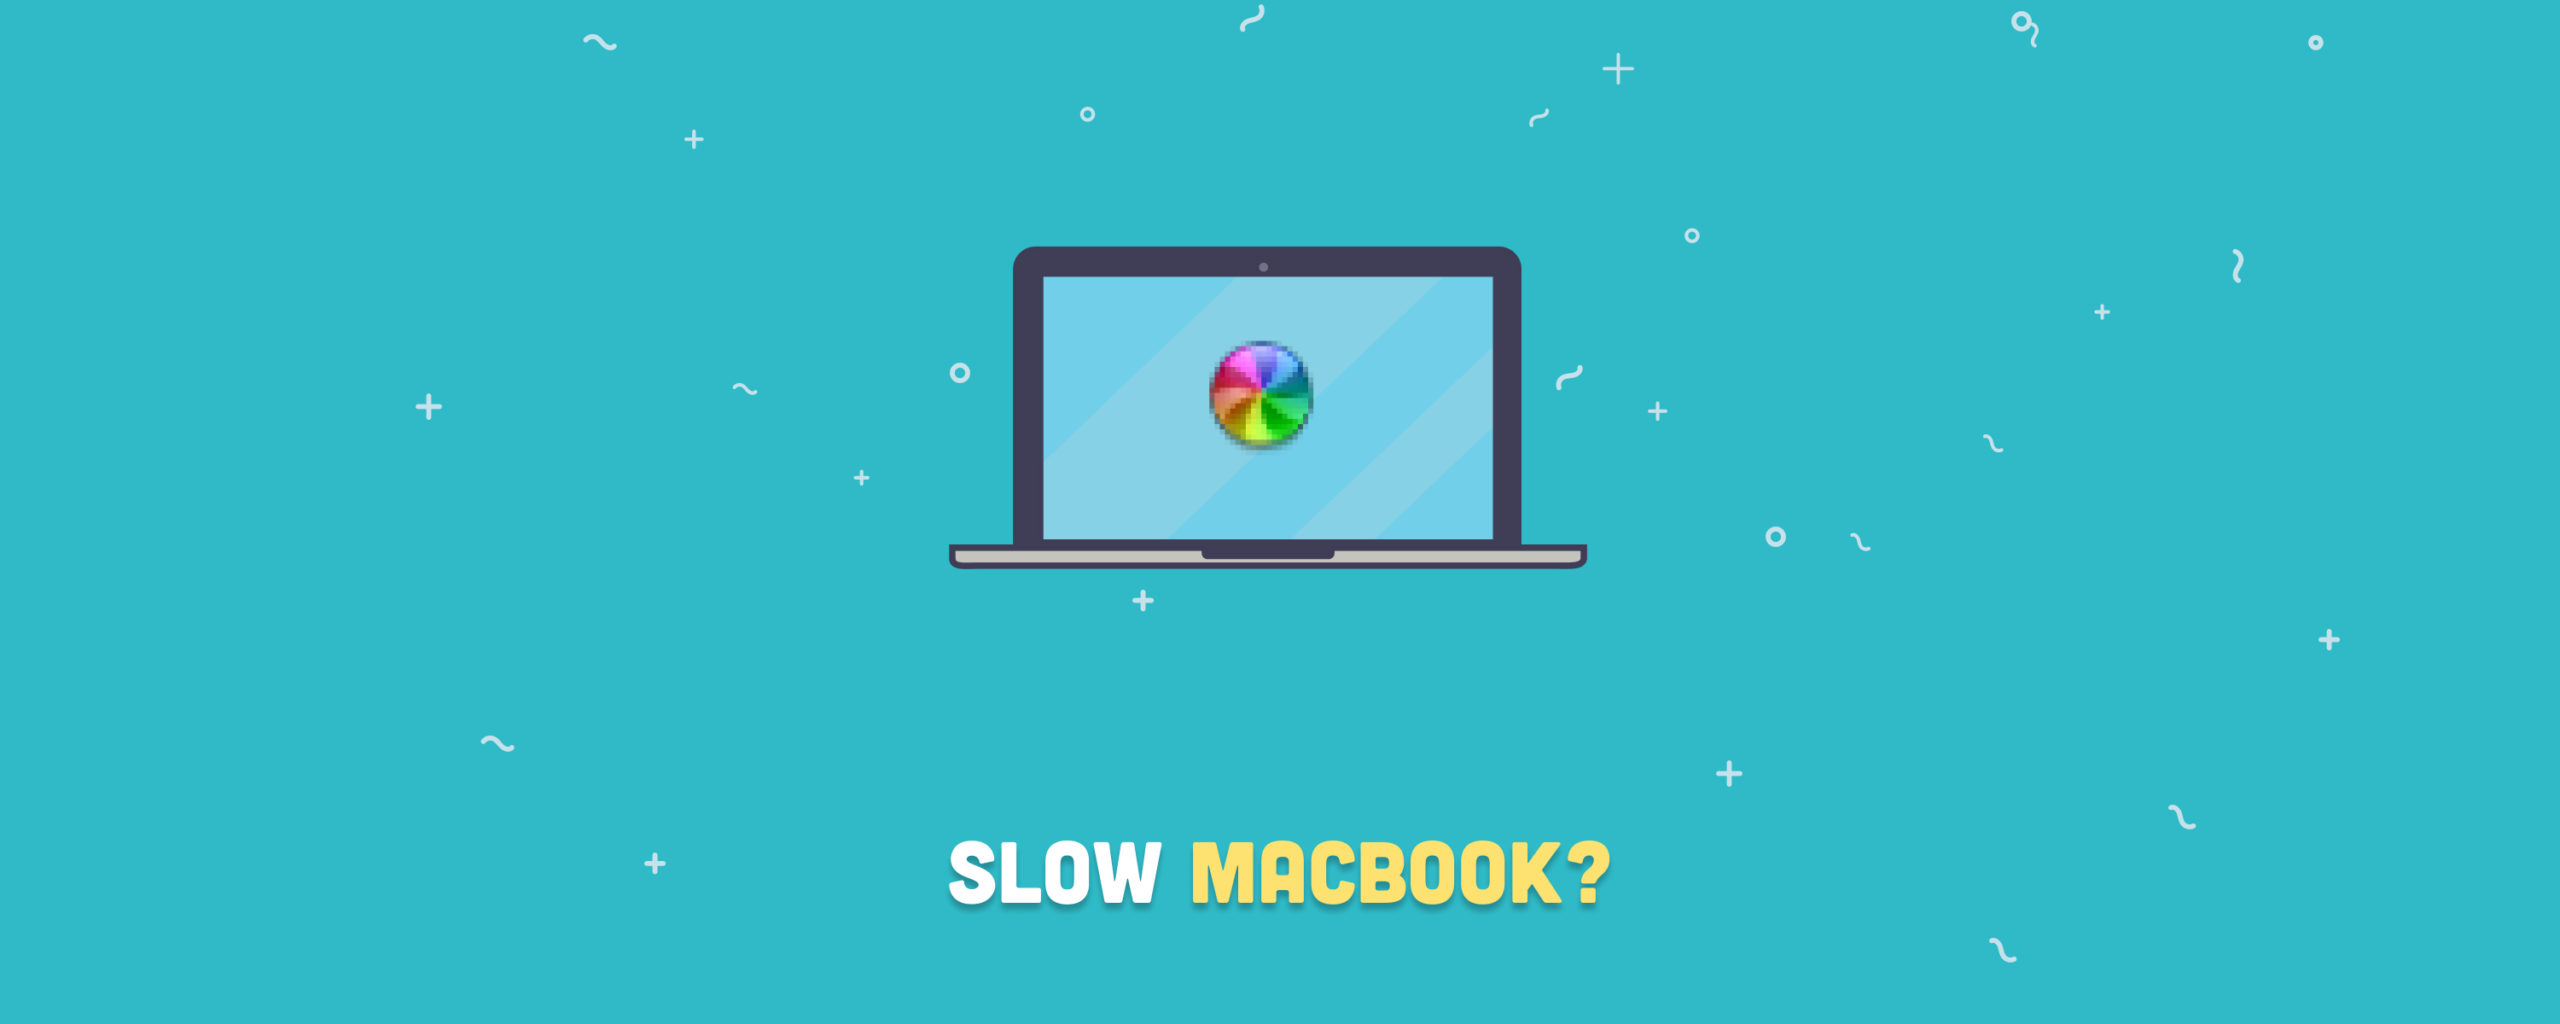 Why Is My Mac So Slow? 10 Ways To Speed Up a Mac (for Free!)